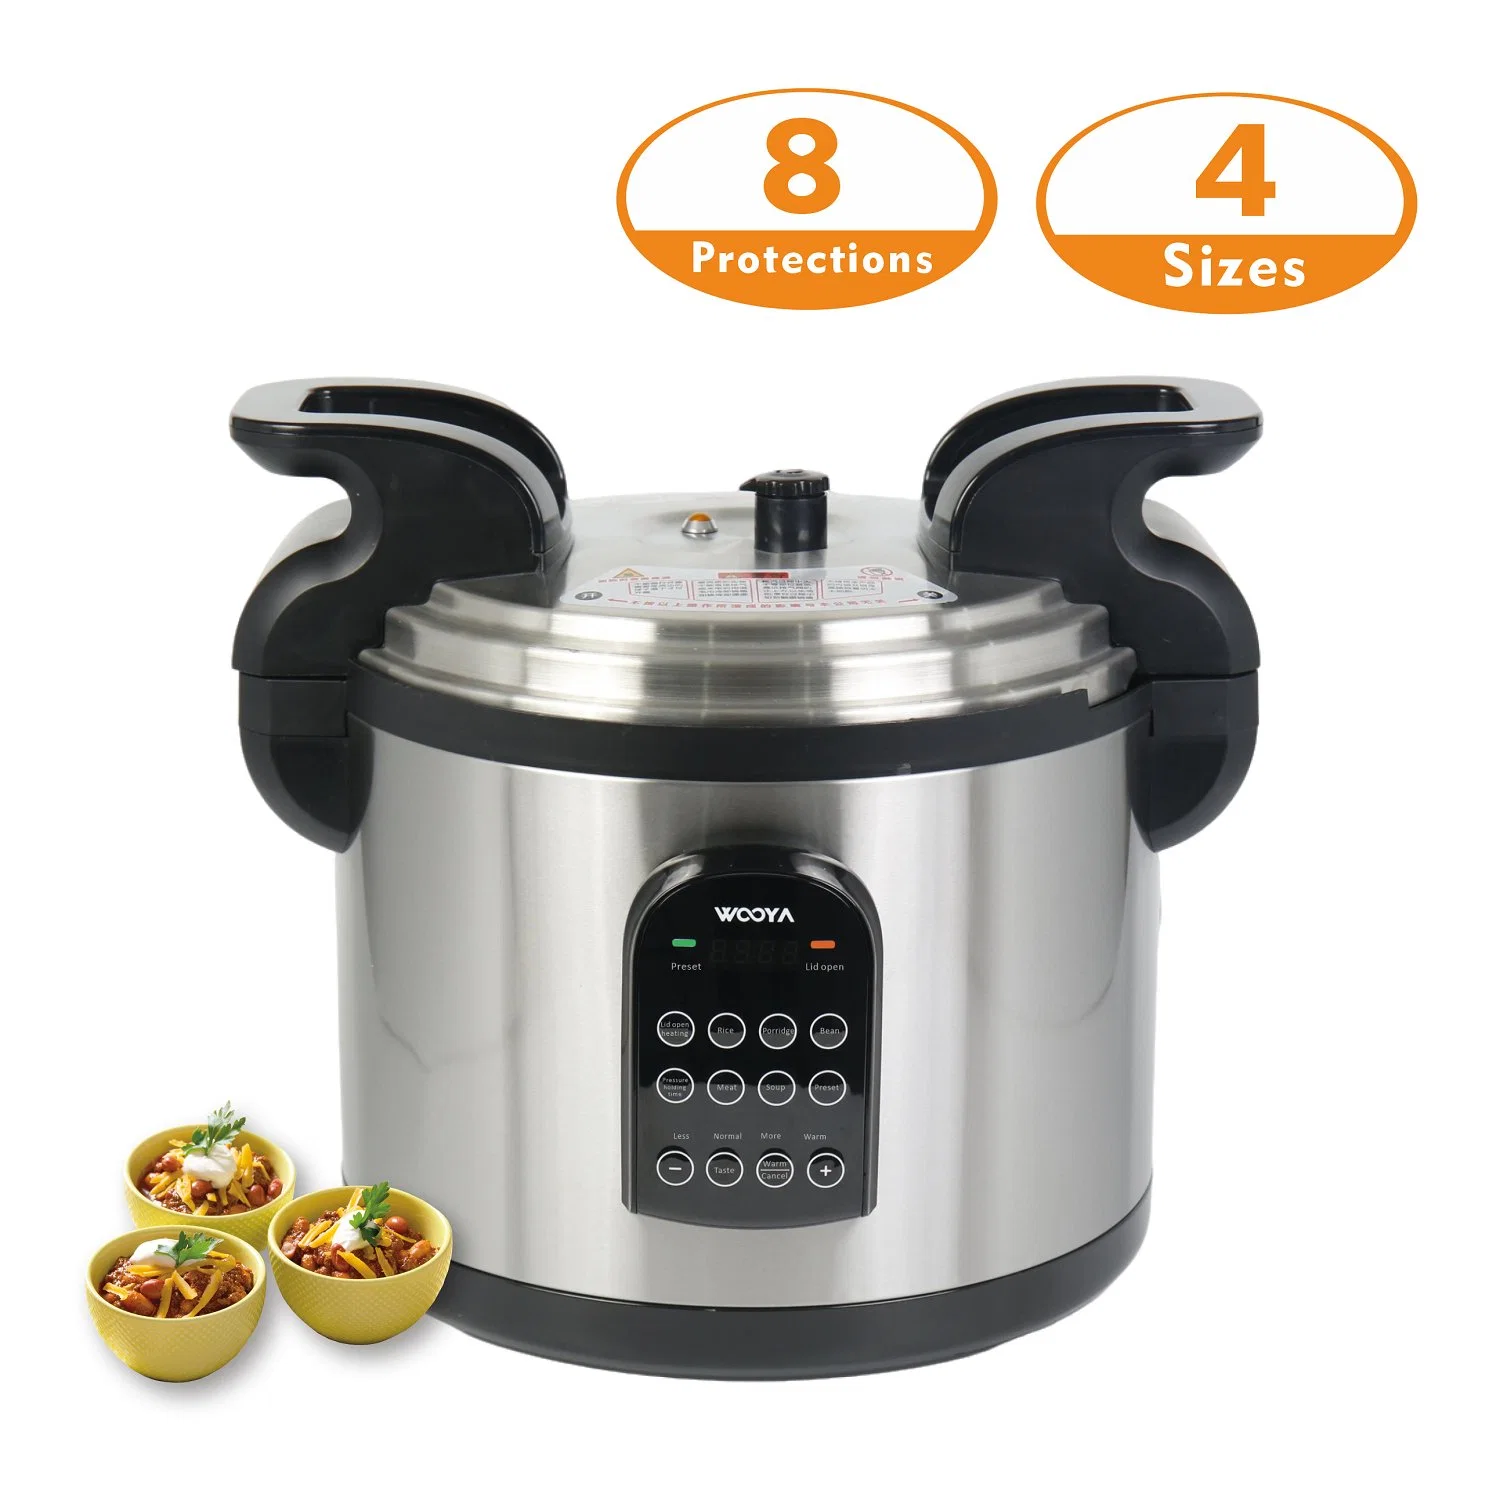 Horeca Pressure Cooker with 8 Electrical Protections for Heavy Duty Kitchen Use